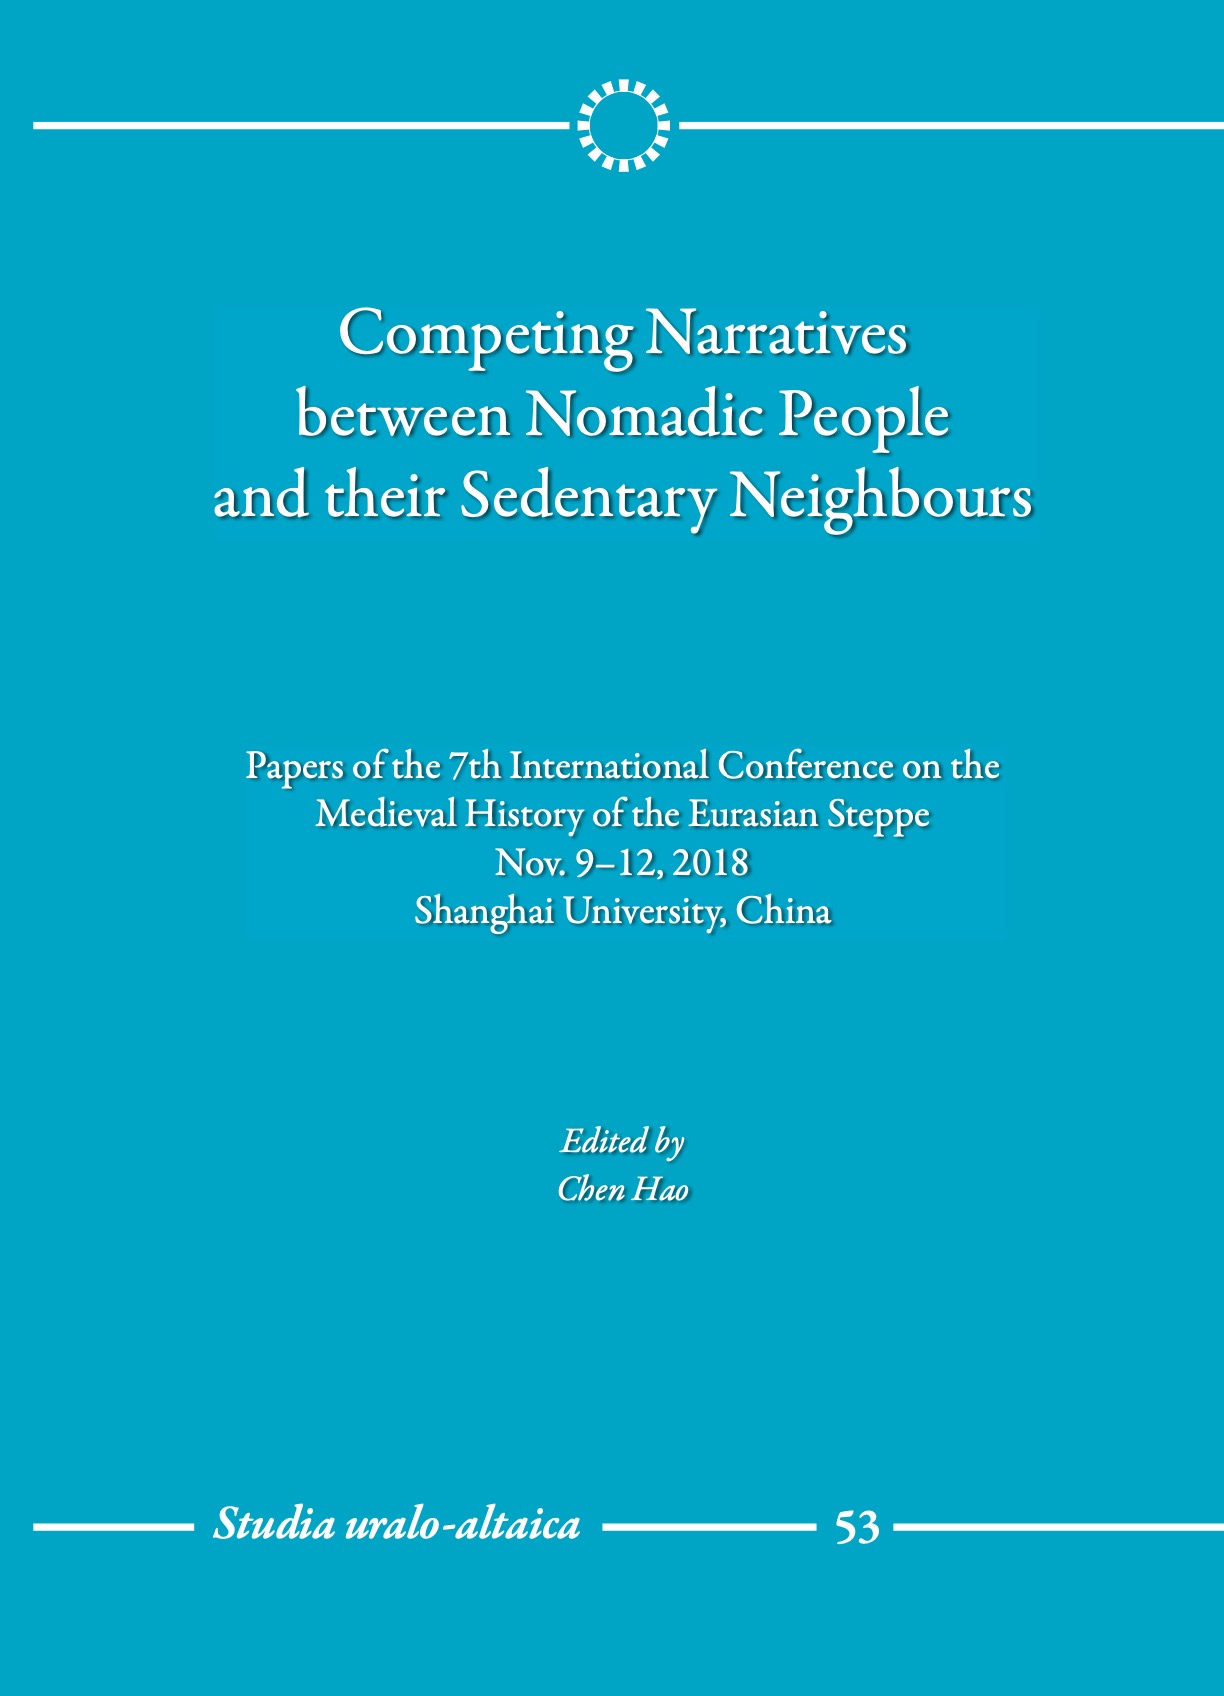 					View Évf. 53 (2019): Competing Narratives between Nomadic People and their Sedentary Neighbours
				